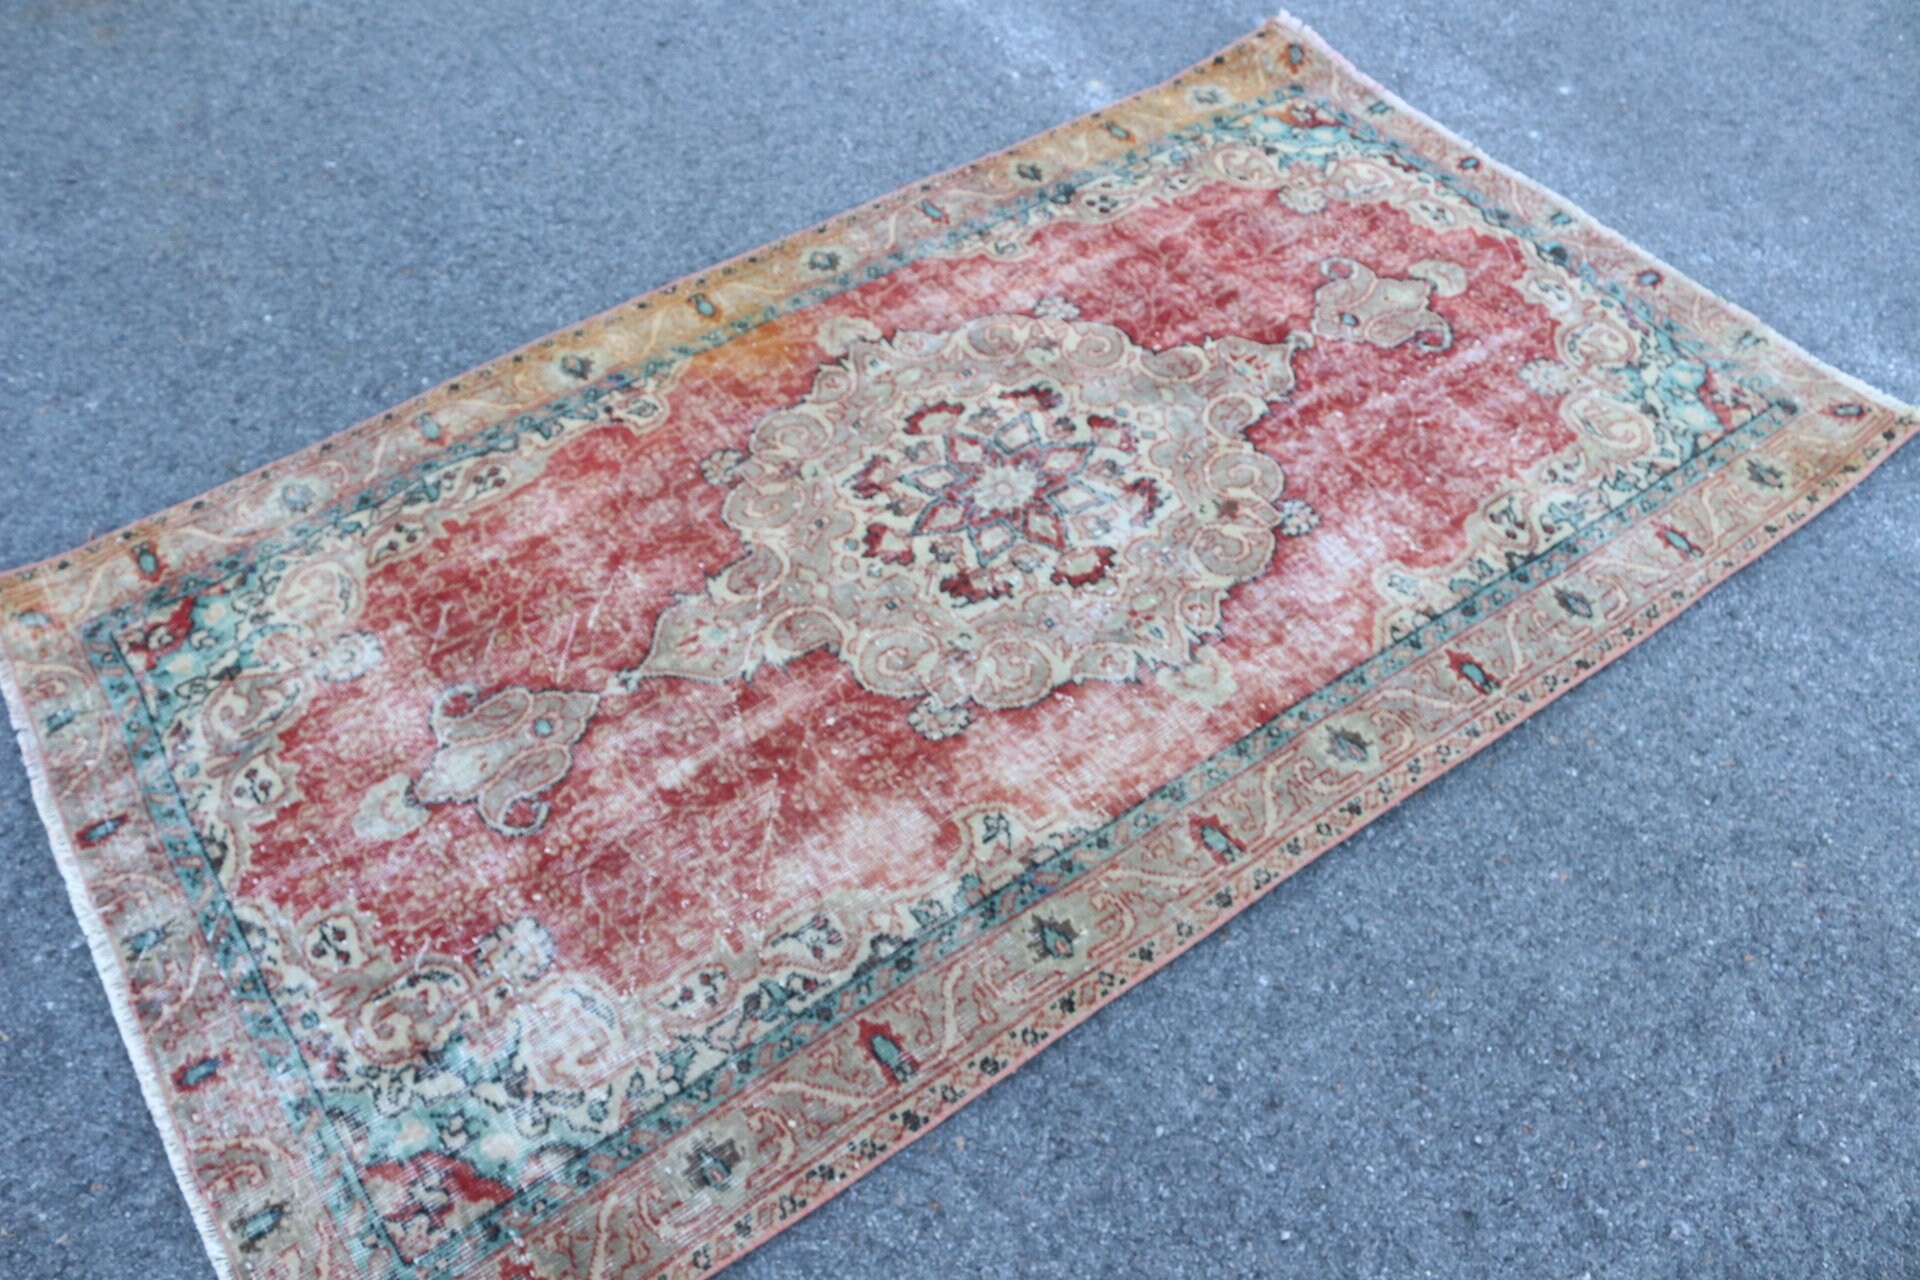 Vintage Rug, Indoor Rug, Antique Rug, Rugs for Area, Bright Rug, Anatolian Rugs, Red Bedroom Rug, Turkish Rugs, 3.8x6.7 ft Area Rug